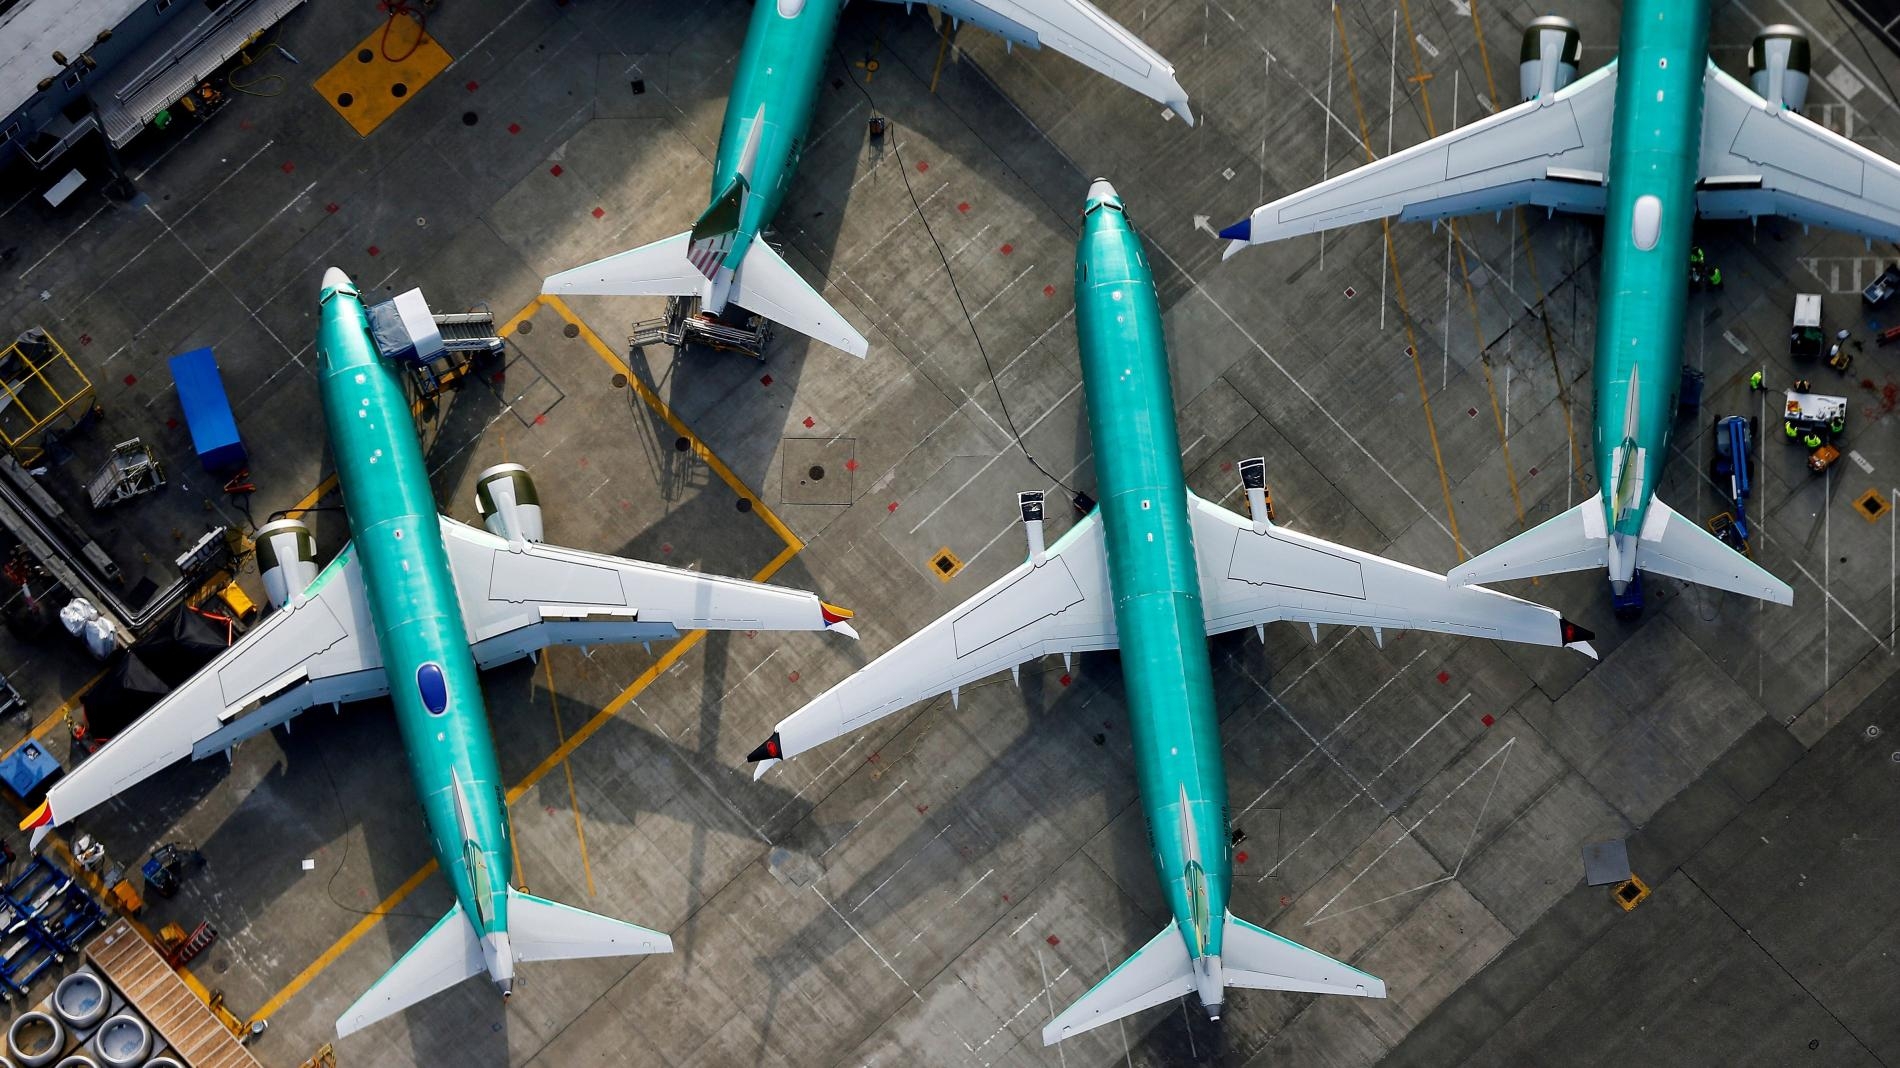 First Boeing 737 Max Certification Flight Complete, Ready For Return To Service